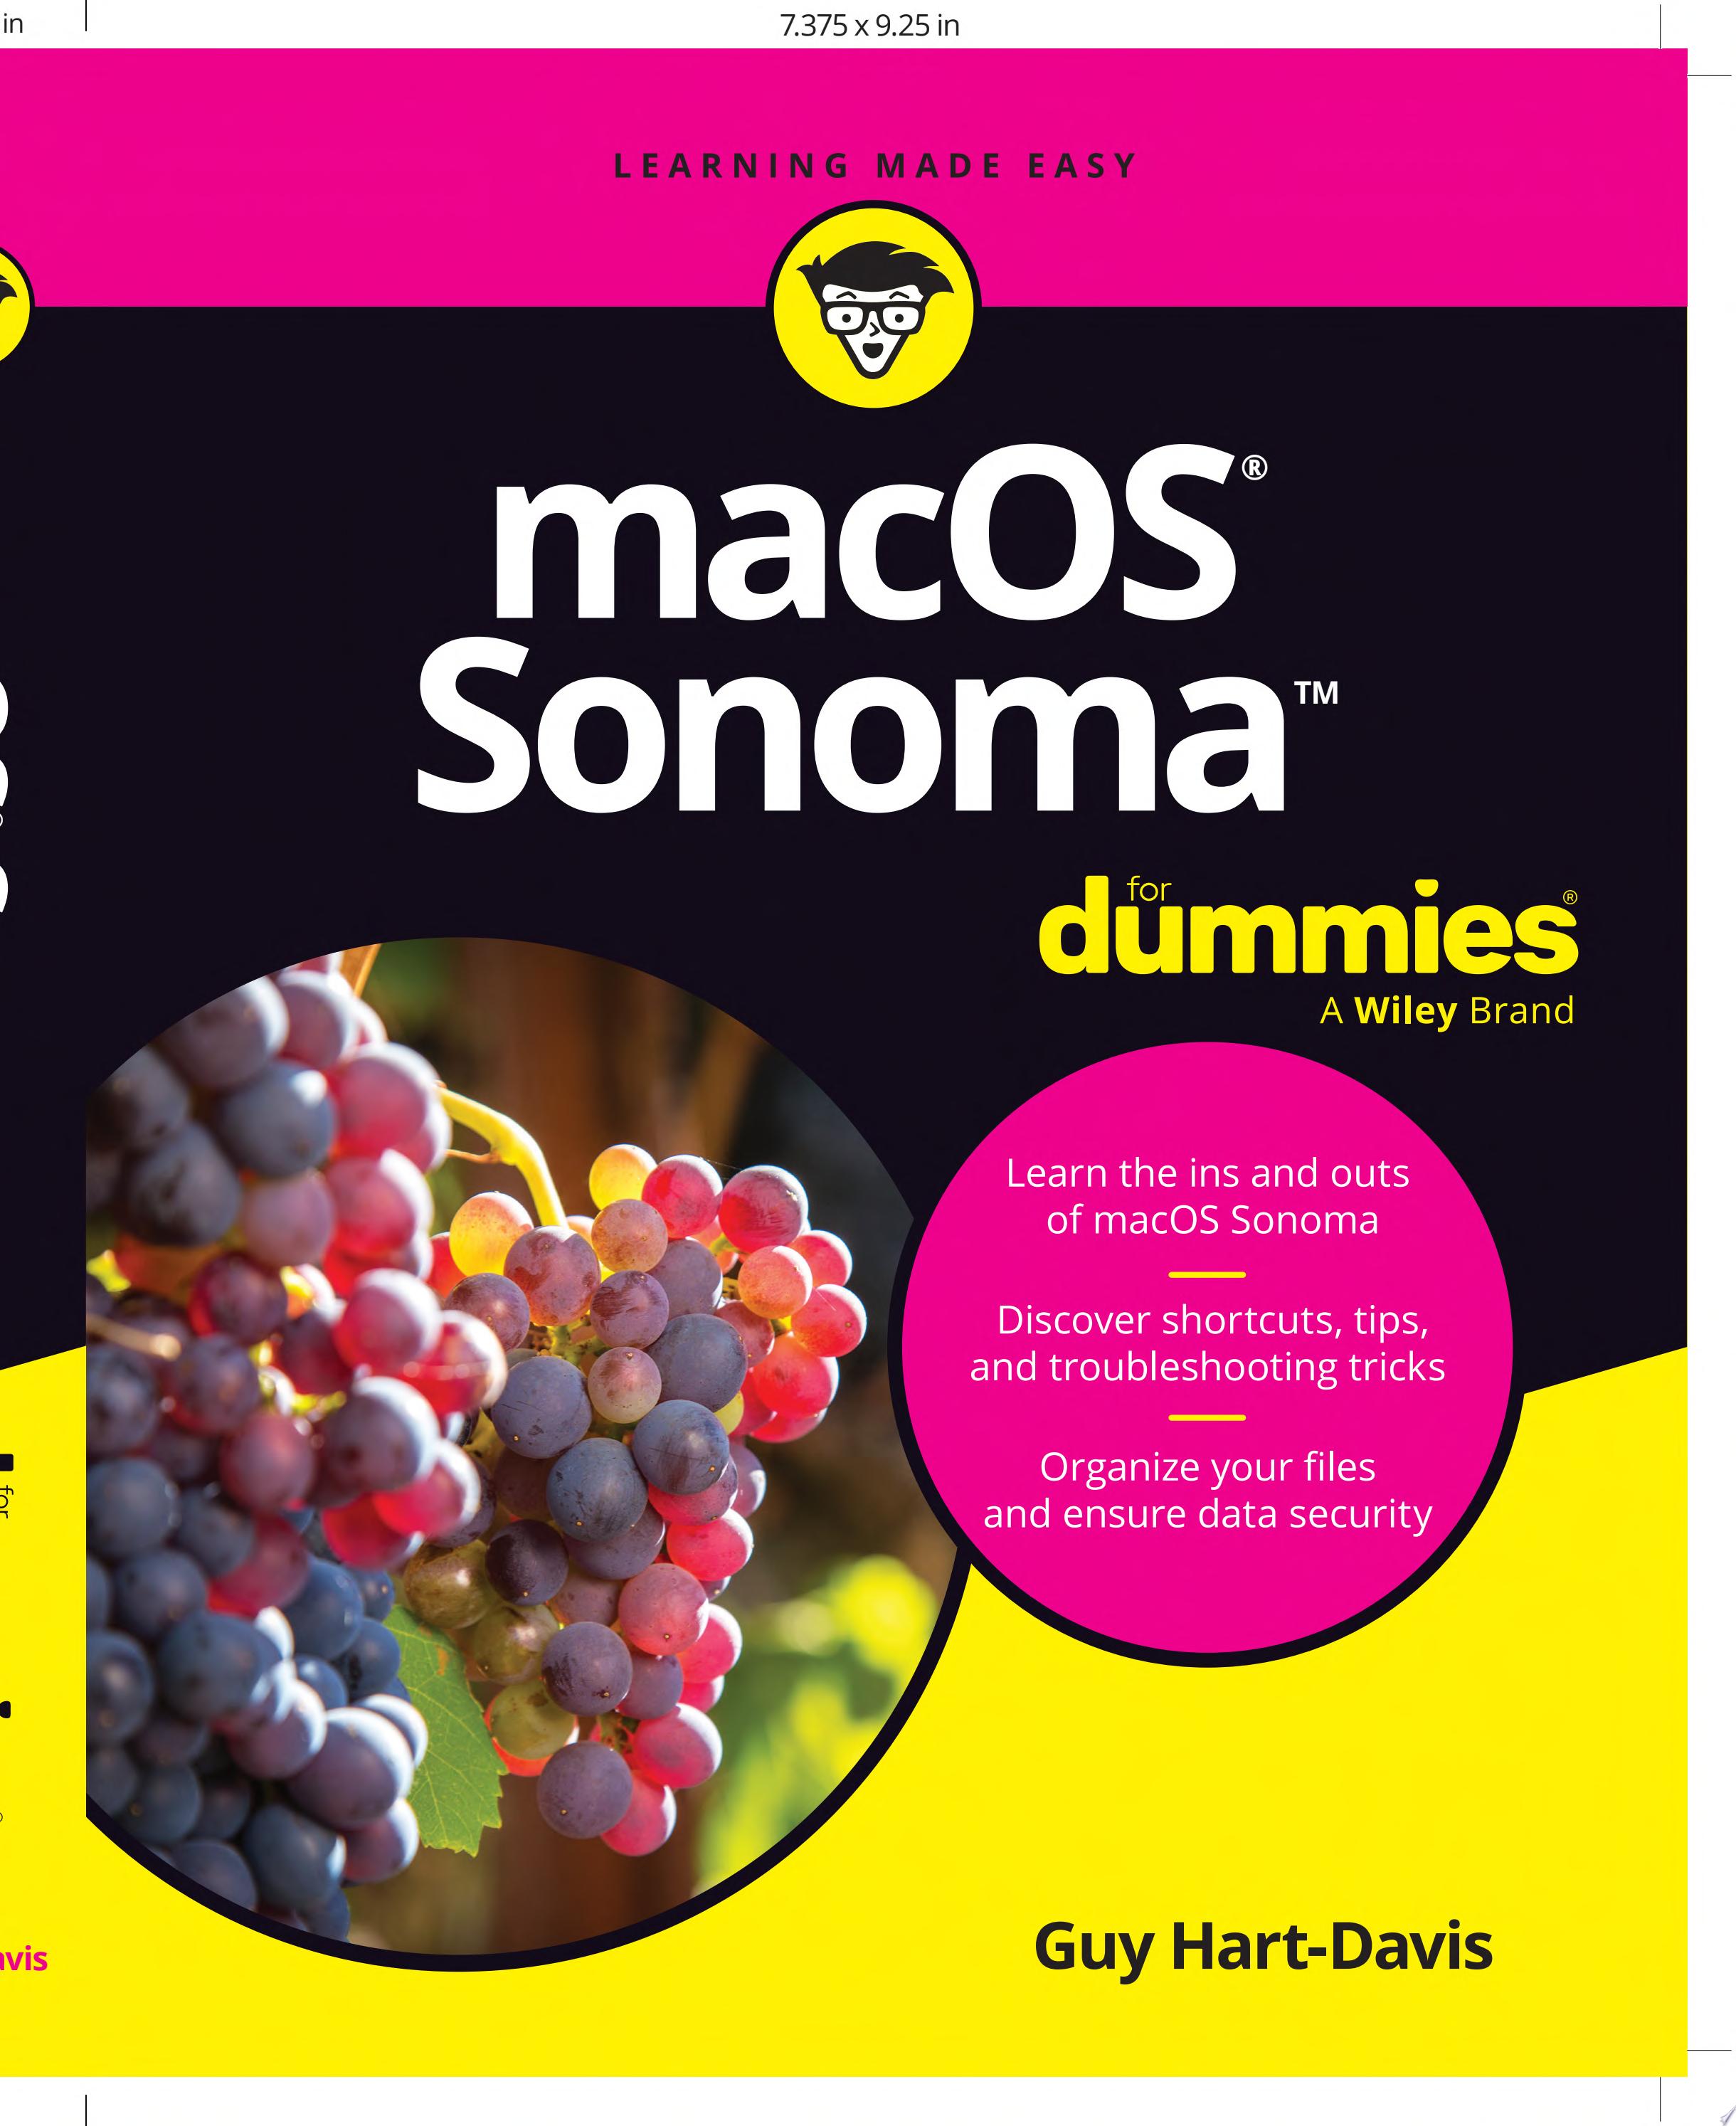 Image for "macOS Sonoma For Dummies"